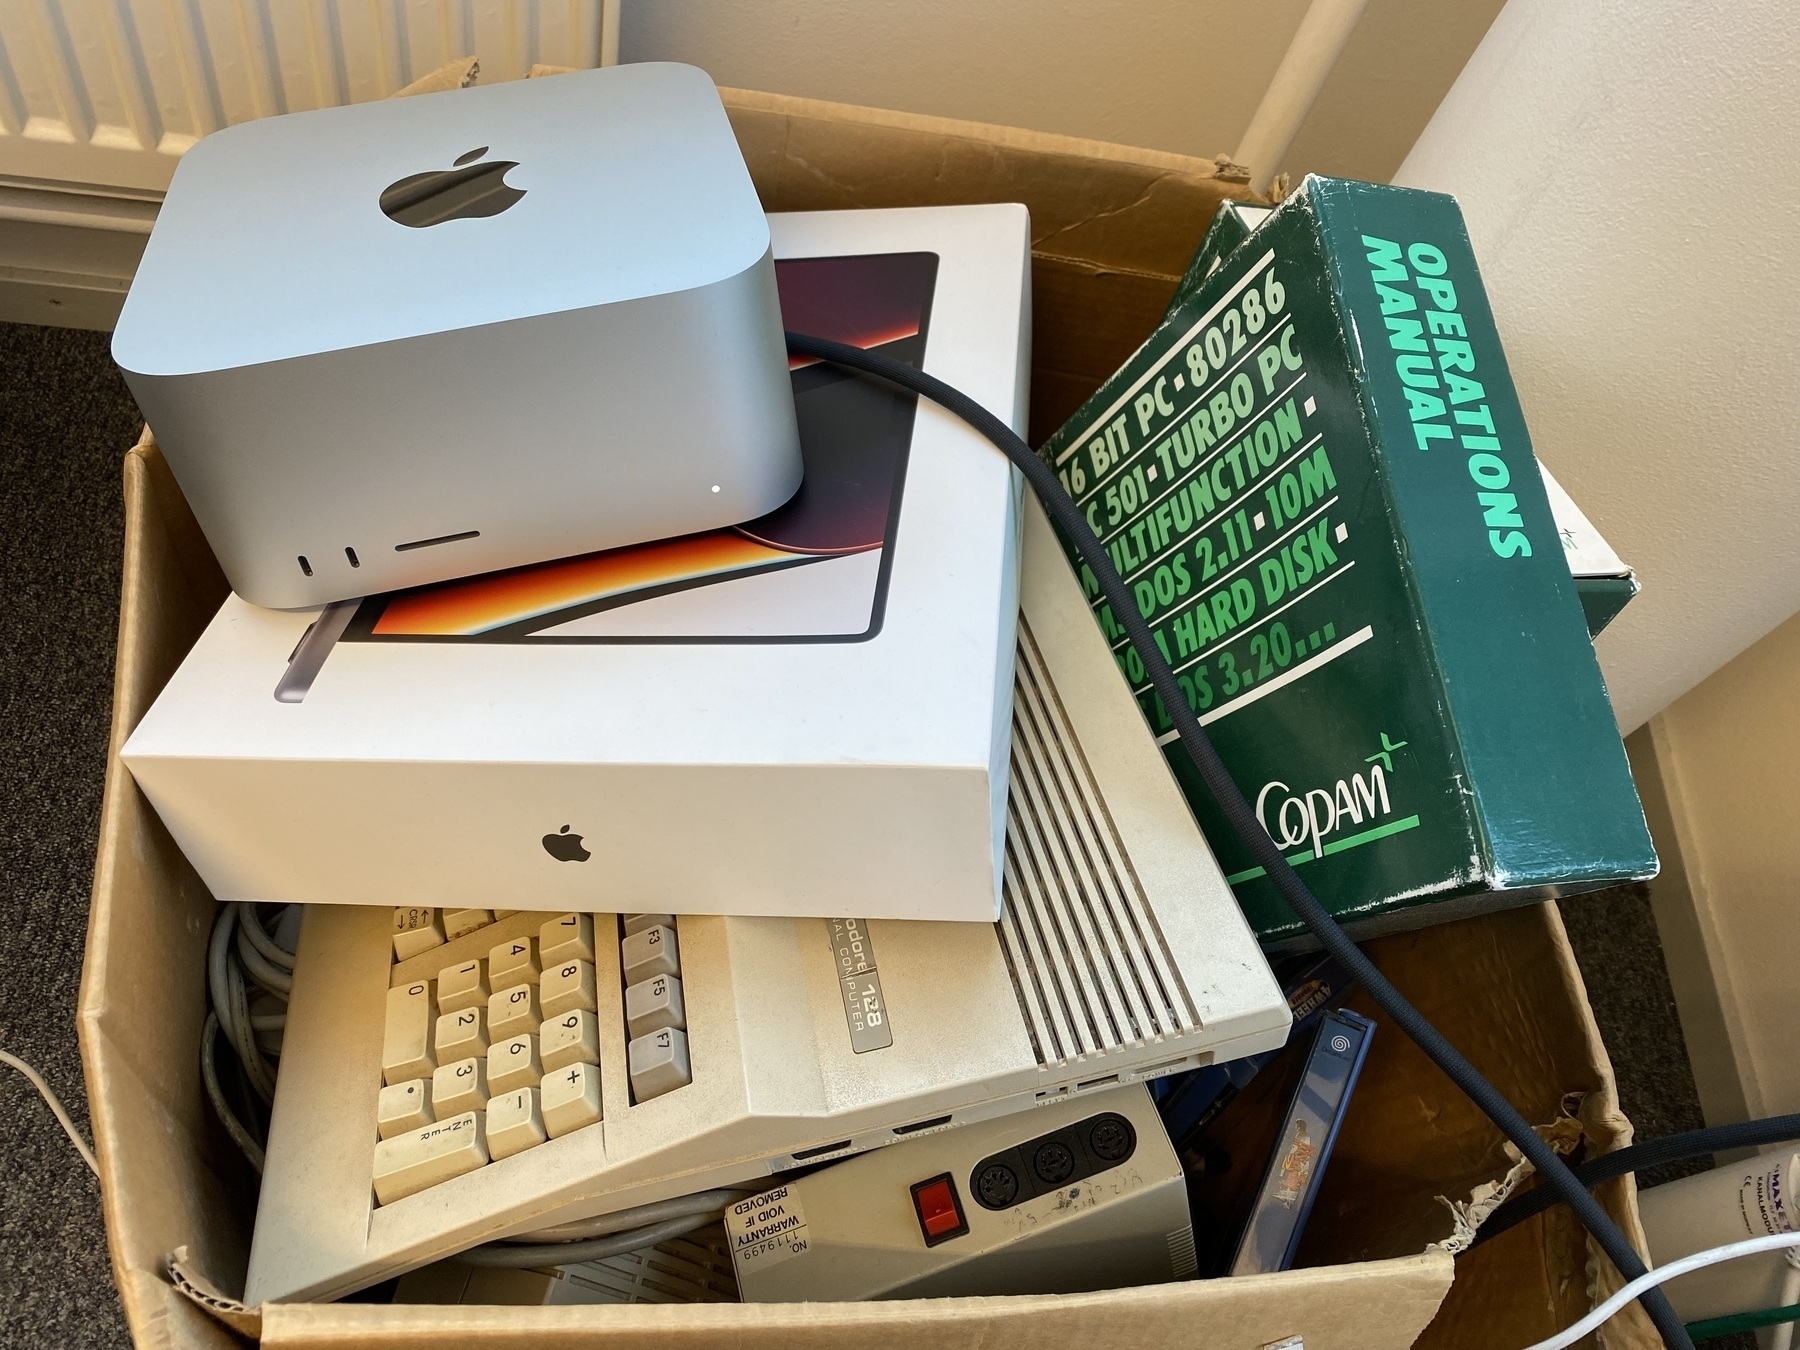 An overflowing cardboard box - on the top of the pile is a Mac Studio (powered on), sitting on top of a MacBook box, sitting on top of a Commodore 128. Next to them is a computer manual in a thick green binder labelled “OPERATIONS MANUAL” and “16 BIT PIC • 80286 • TURBO PC • … DOS 2.11 • … 10 M … HARD DISK • DOS 3.20…”